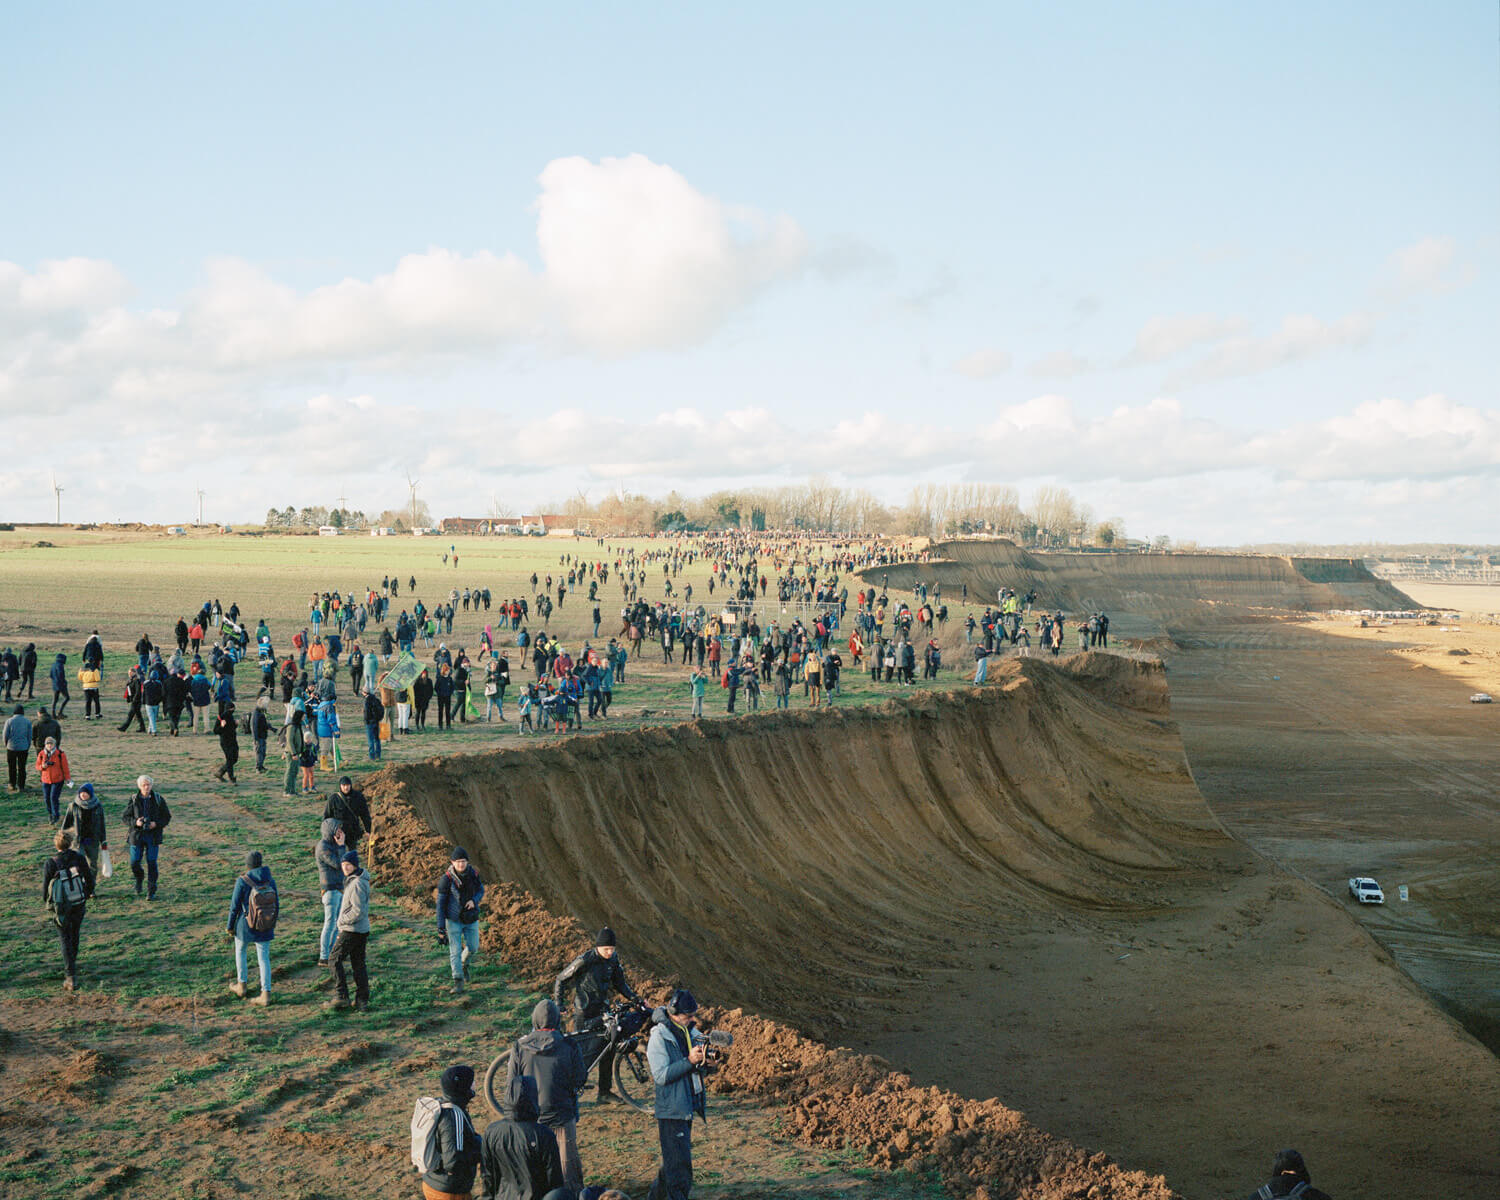 A crowd of people gathered at the edge of a quarry site that has carved away the rural landscape.